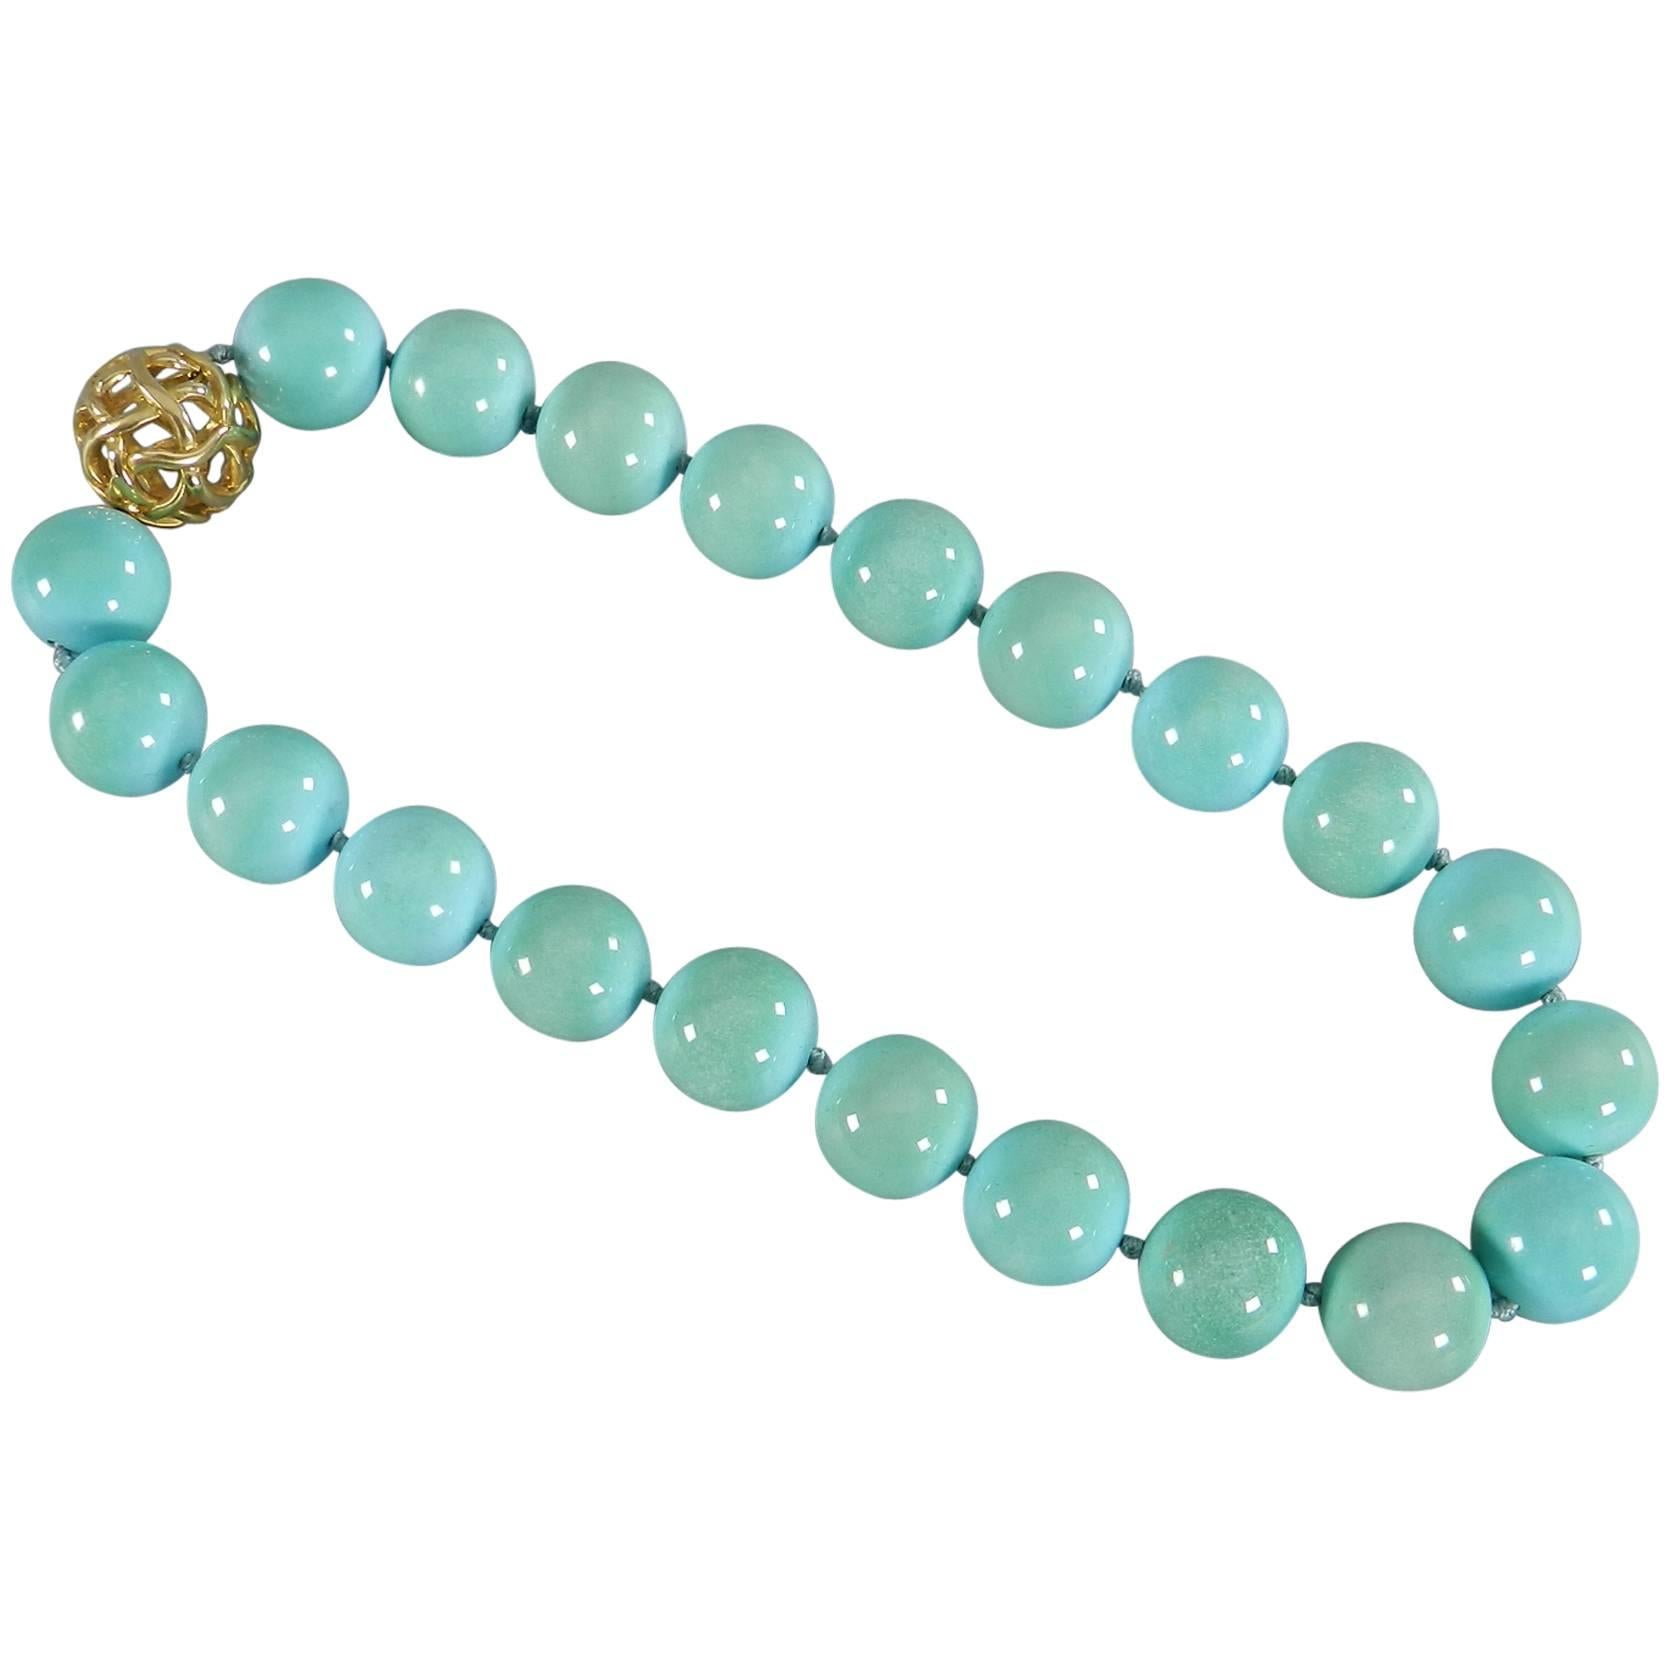 Angela Cummings Turquoise Bead Necklace with Gold Clasp